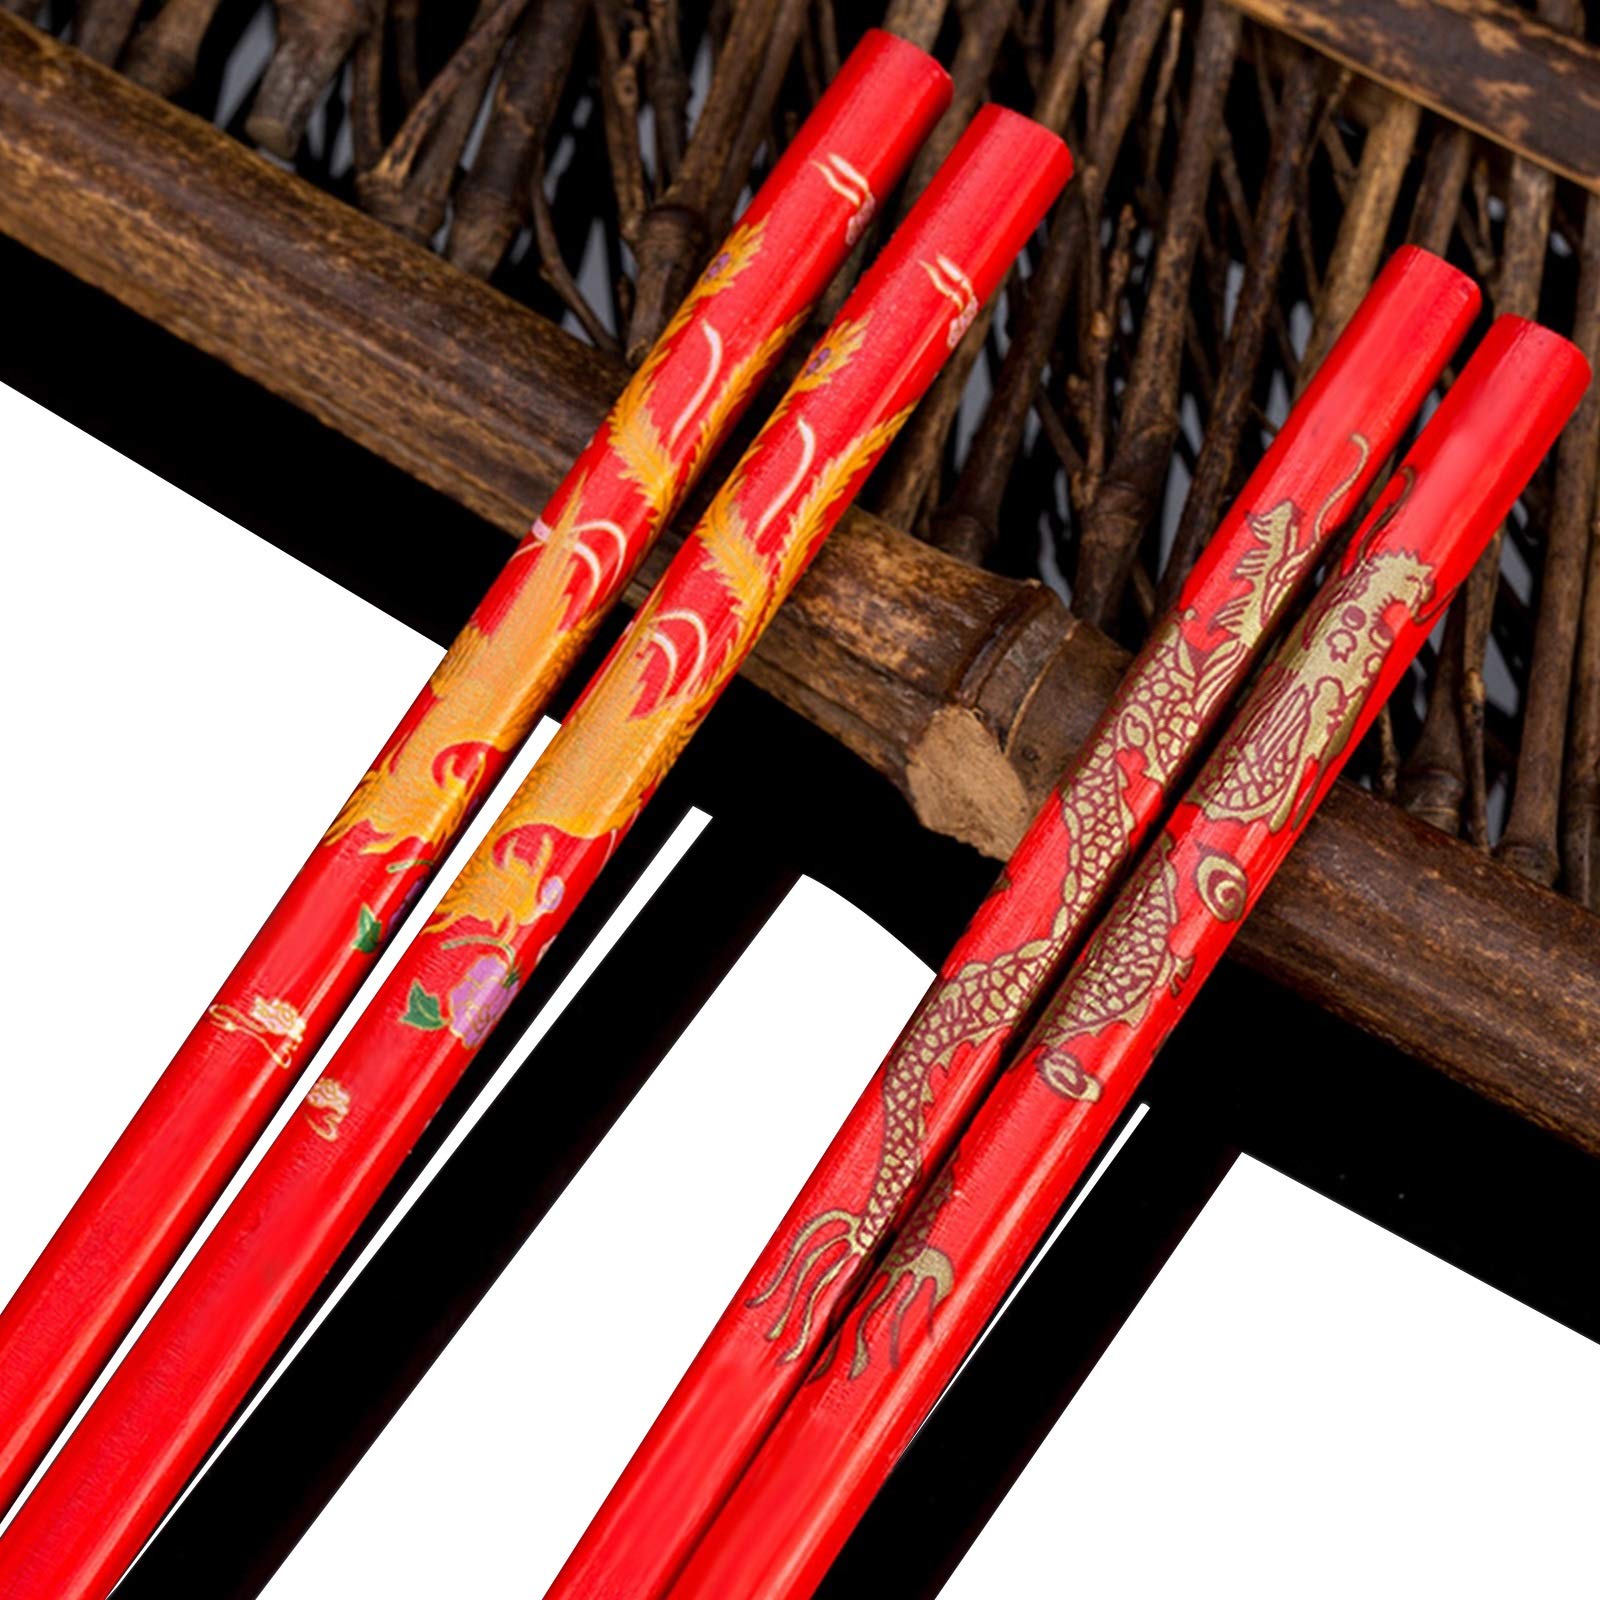 CheeseandU 10Pairs Chinese Knot Red Wood Chopsticks Durable Household Food Stick with Gold Dragon Phoenix Pattern Printed Tableware Chopstick Set Wedding Gift Christmas Gift 2021 New Year Gift